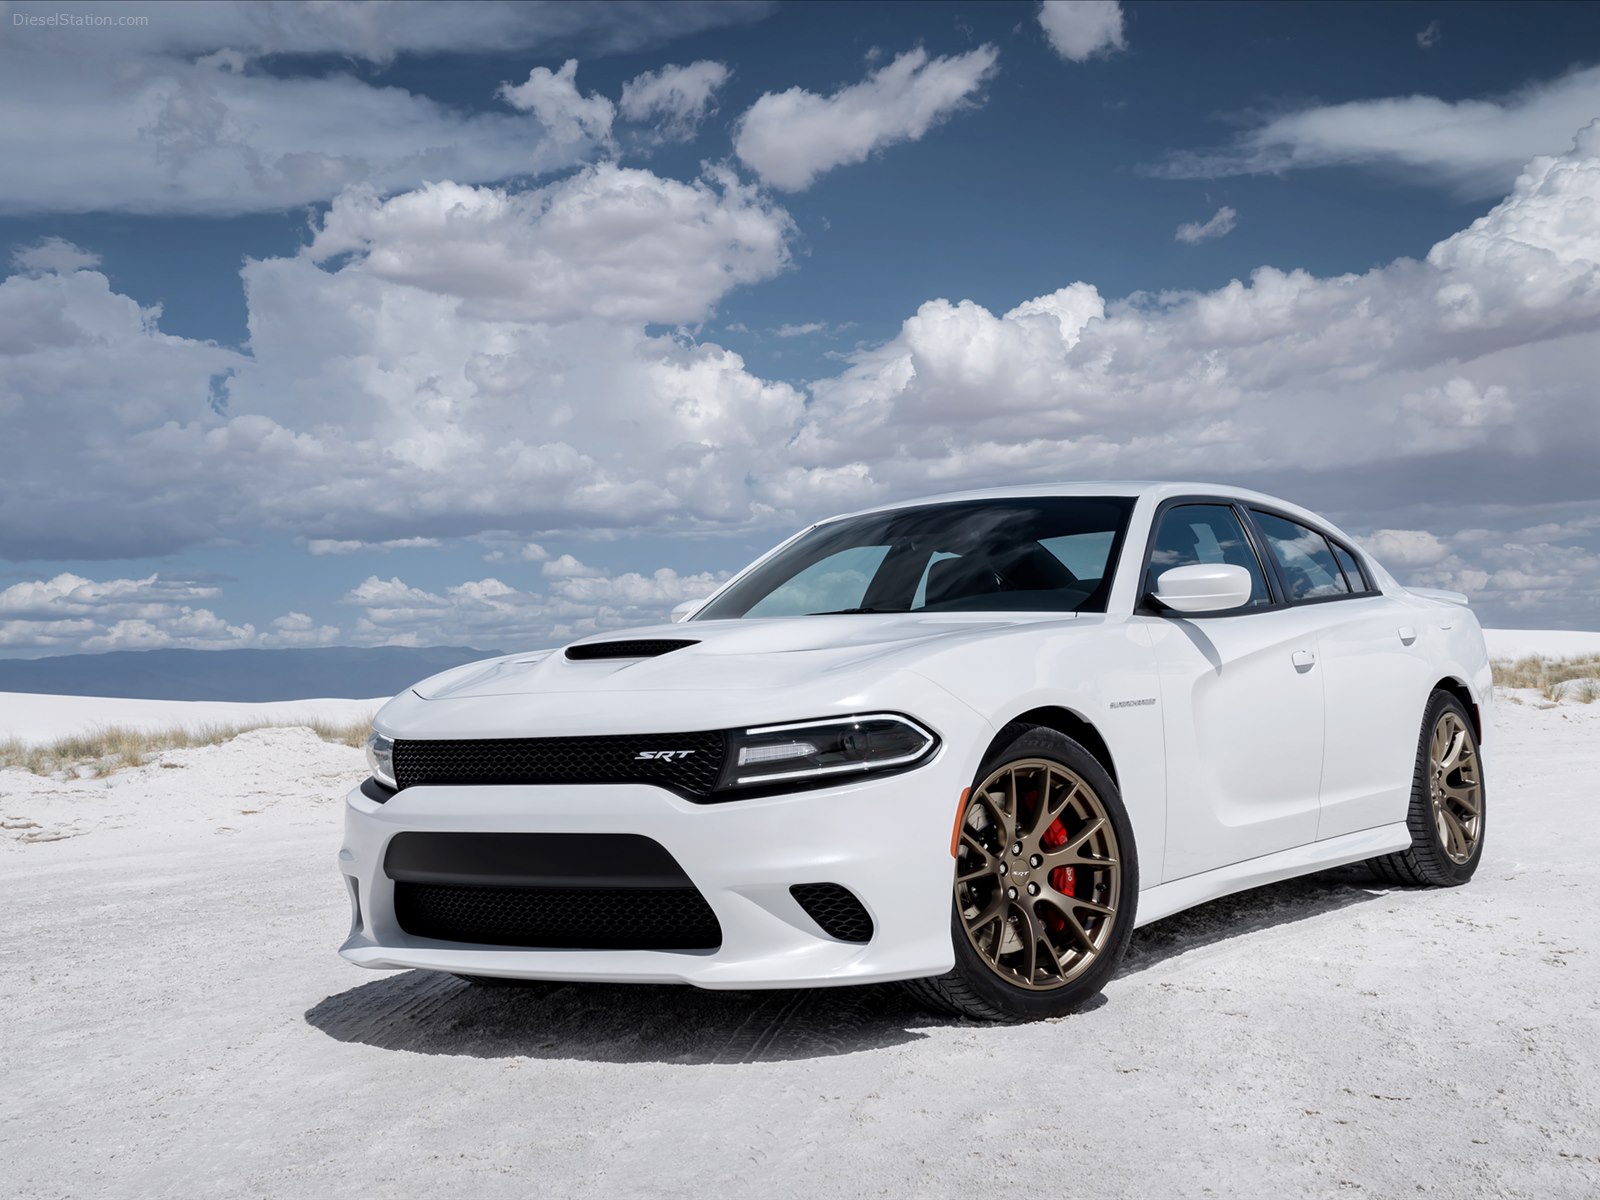 Dodge Charger SRT Hellcat 2015 Exotic Car Wallpapers 20 of 118